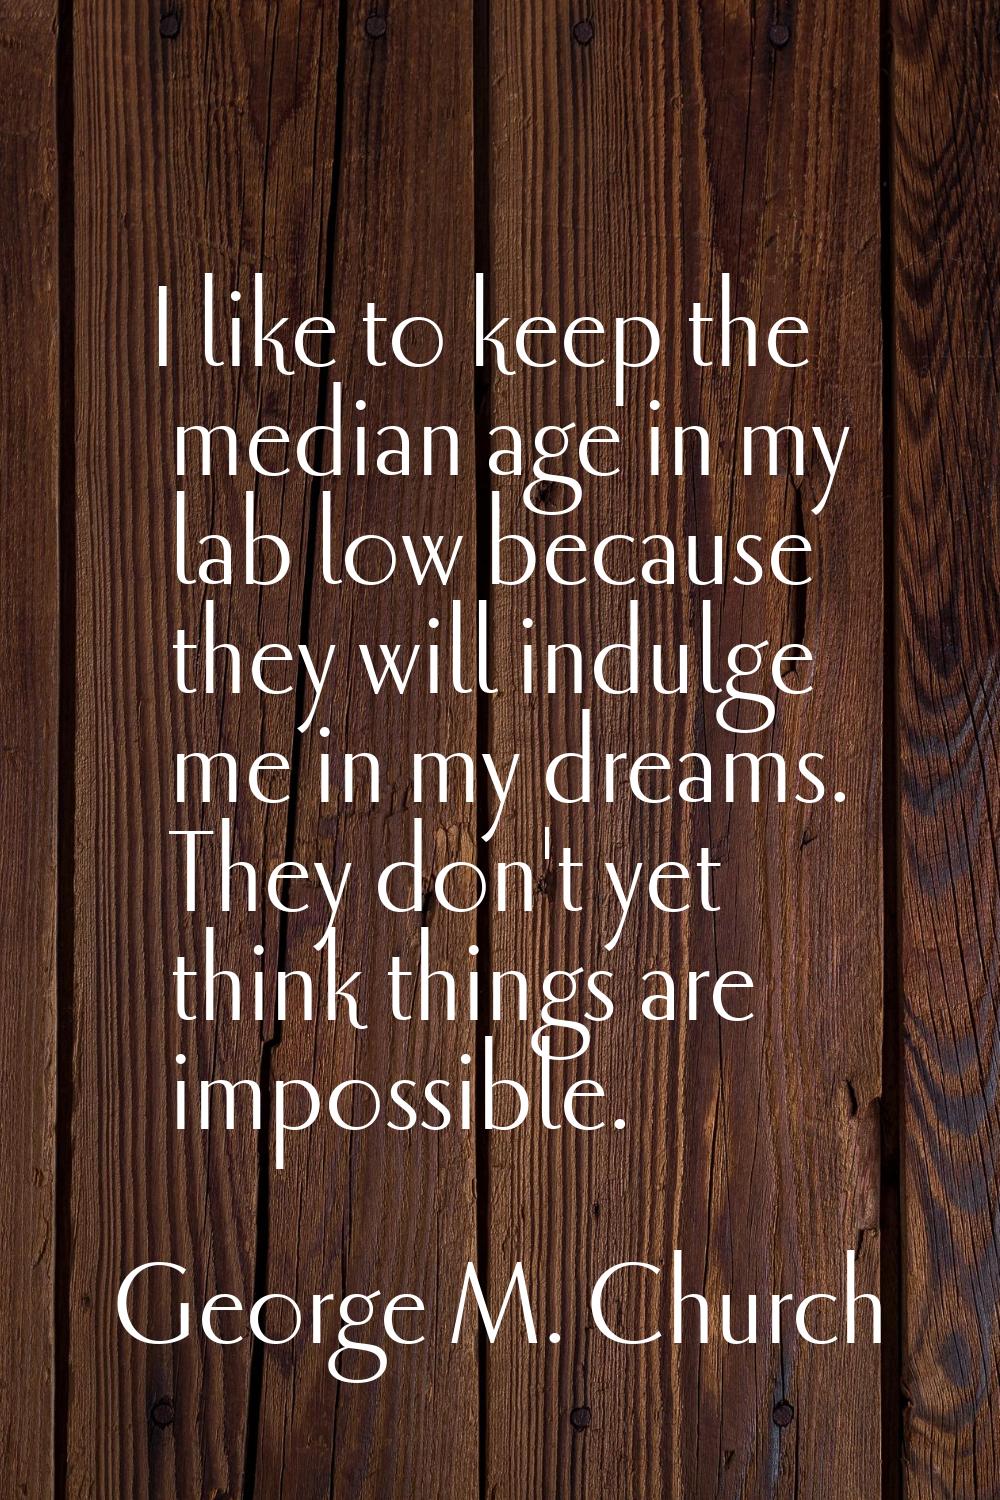 I like to keep the median age in my lab low because they will indulge me in my dreams. They don't y